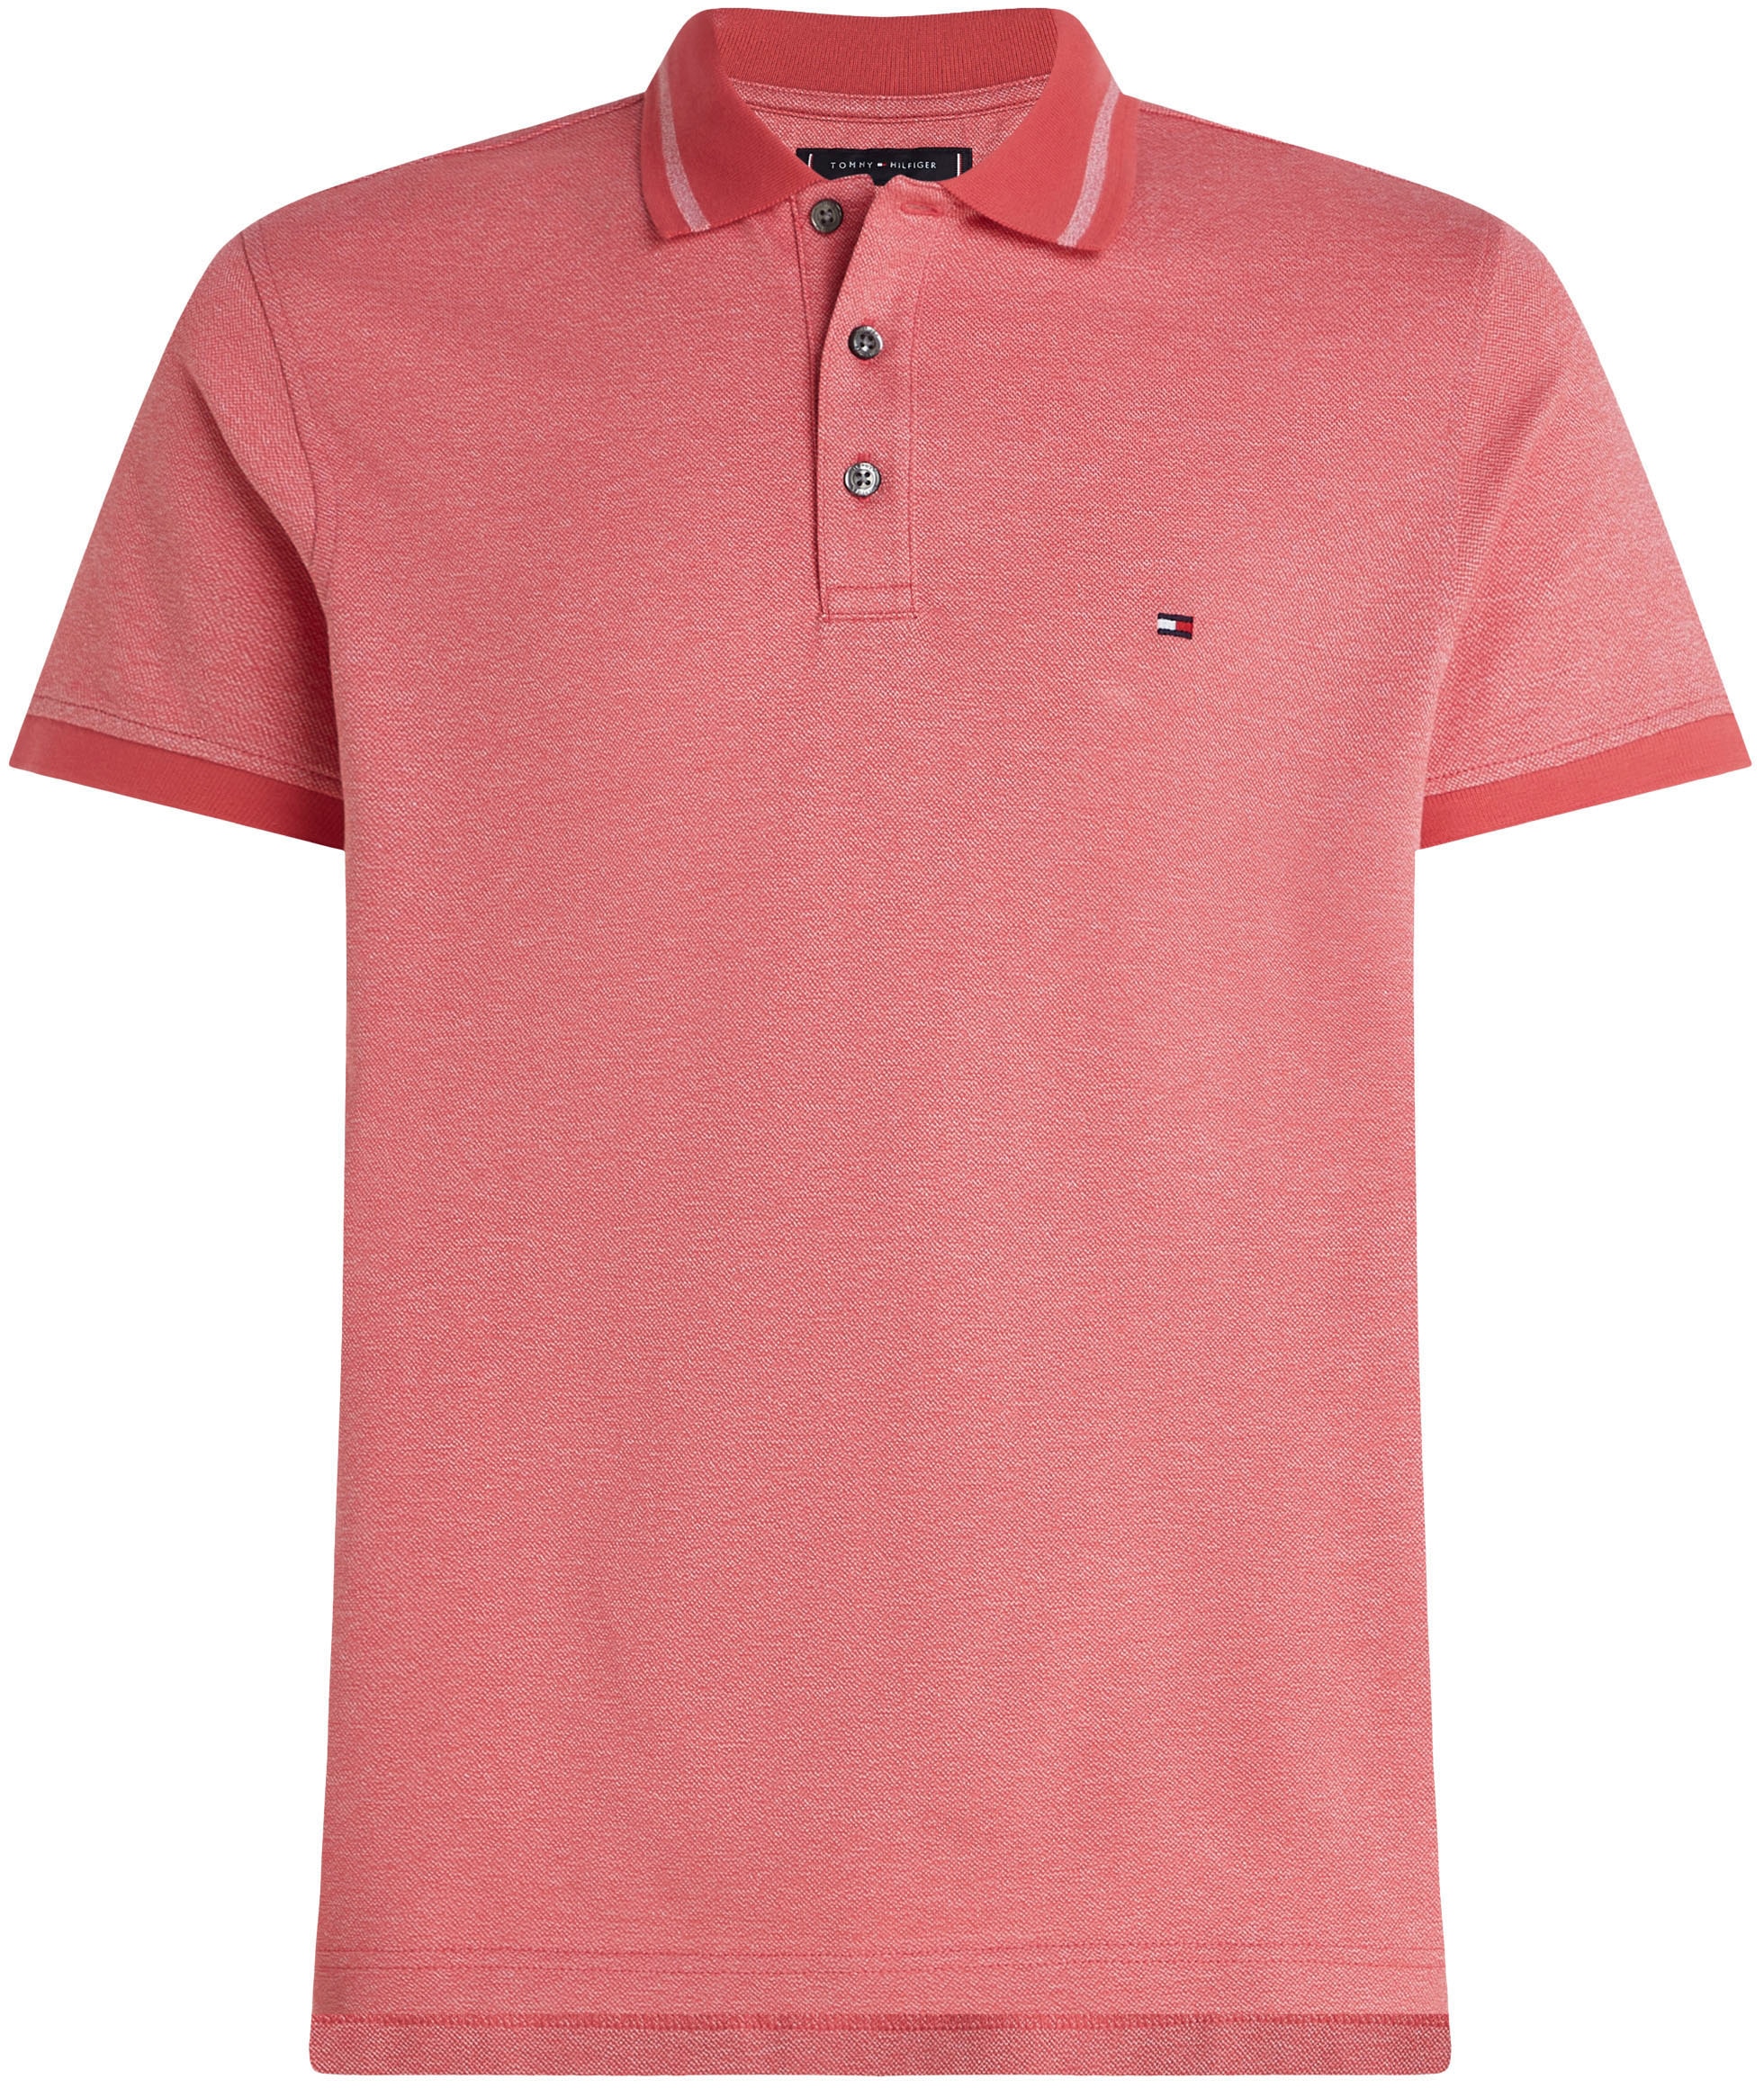 Tommy Hilfiger Poloshirt »PRETWIST MOULINE TIPPED POLO«, in Mouline-Optik